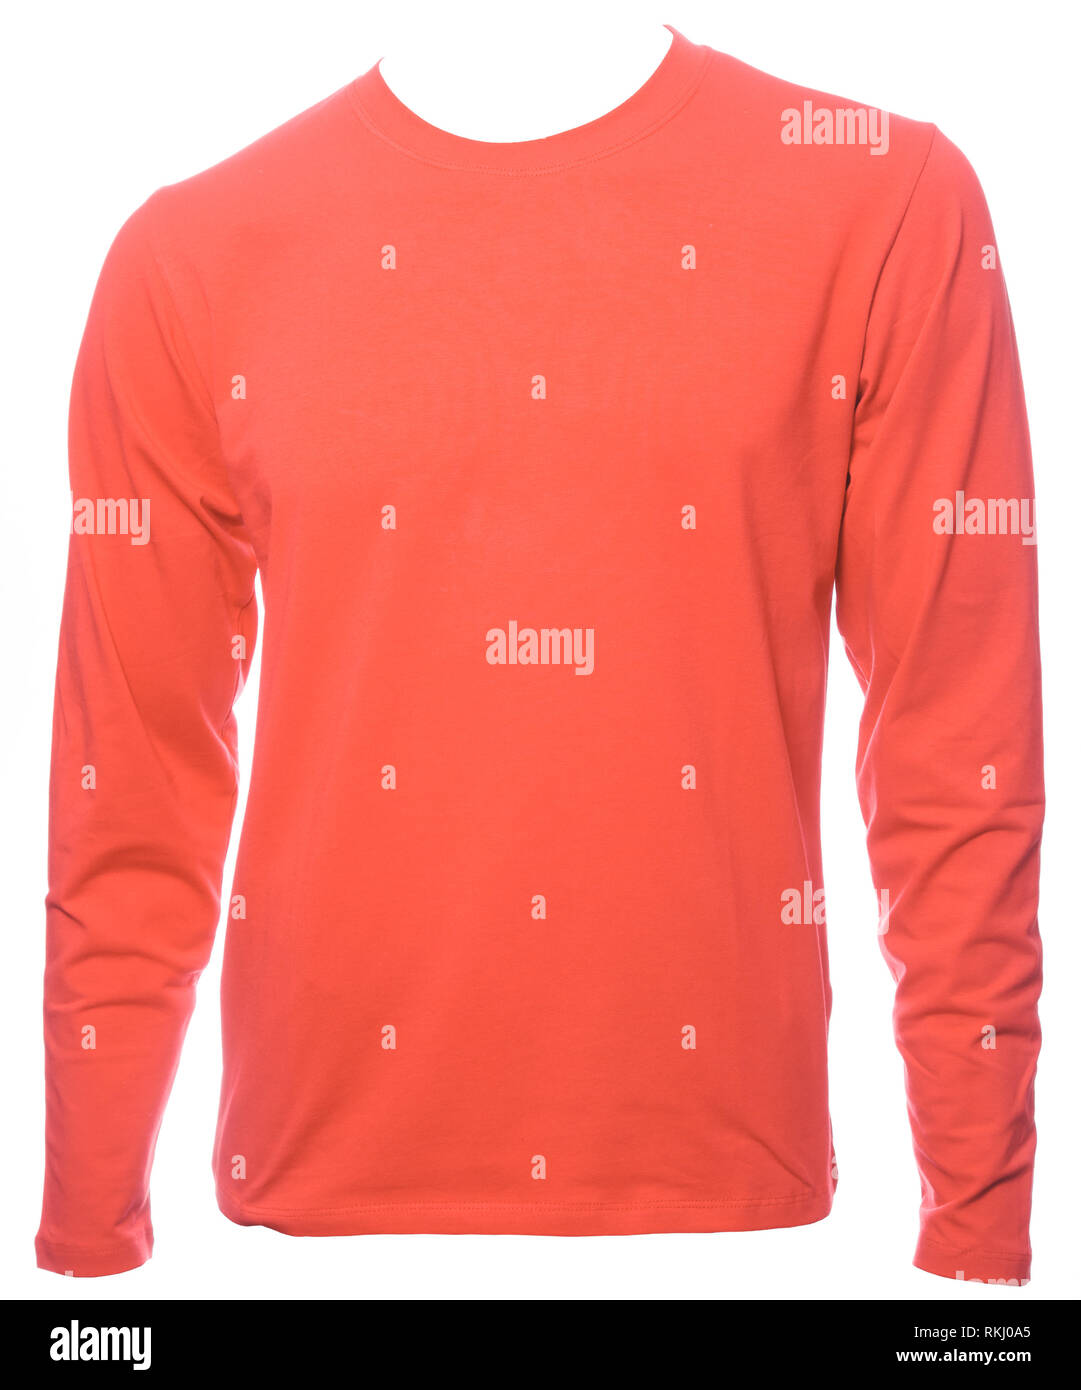 Living coral trendy color of the year 2019 plain long sleeved cotton T-Shirt template isolated on a white background Stock Photo